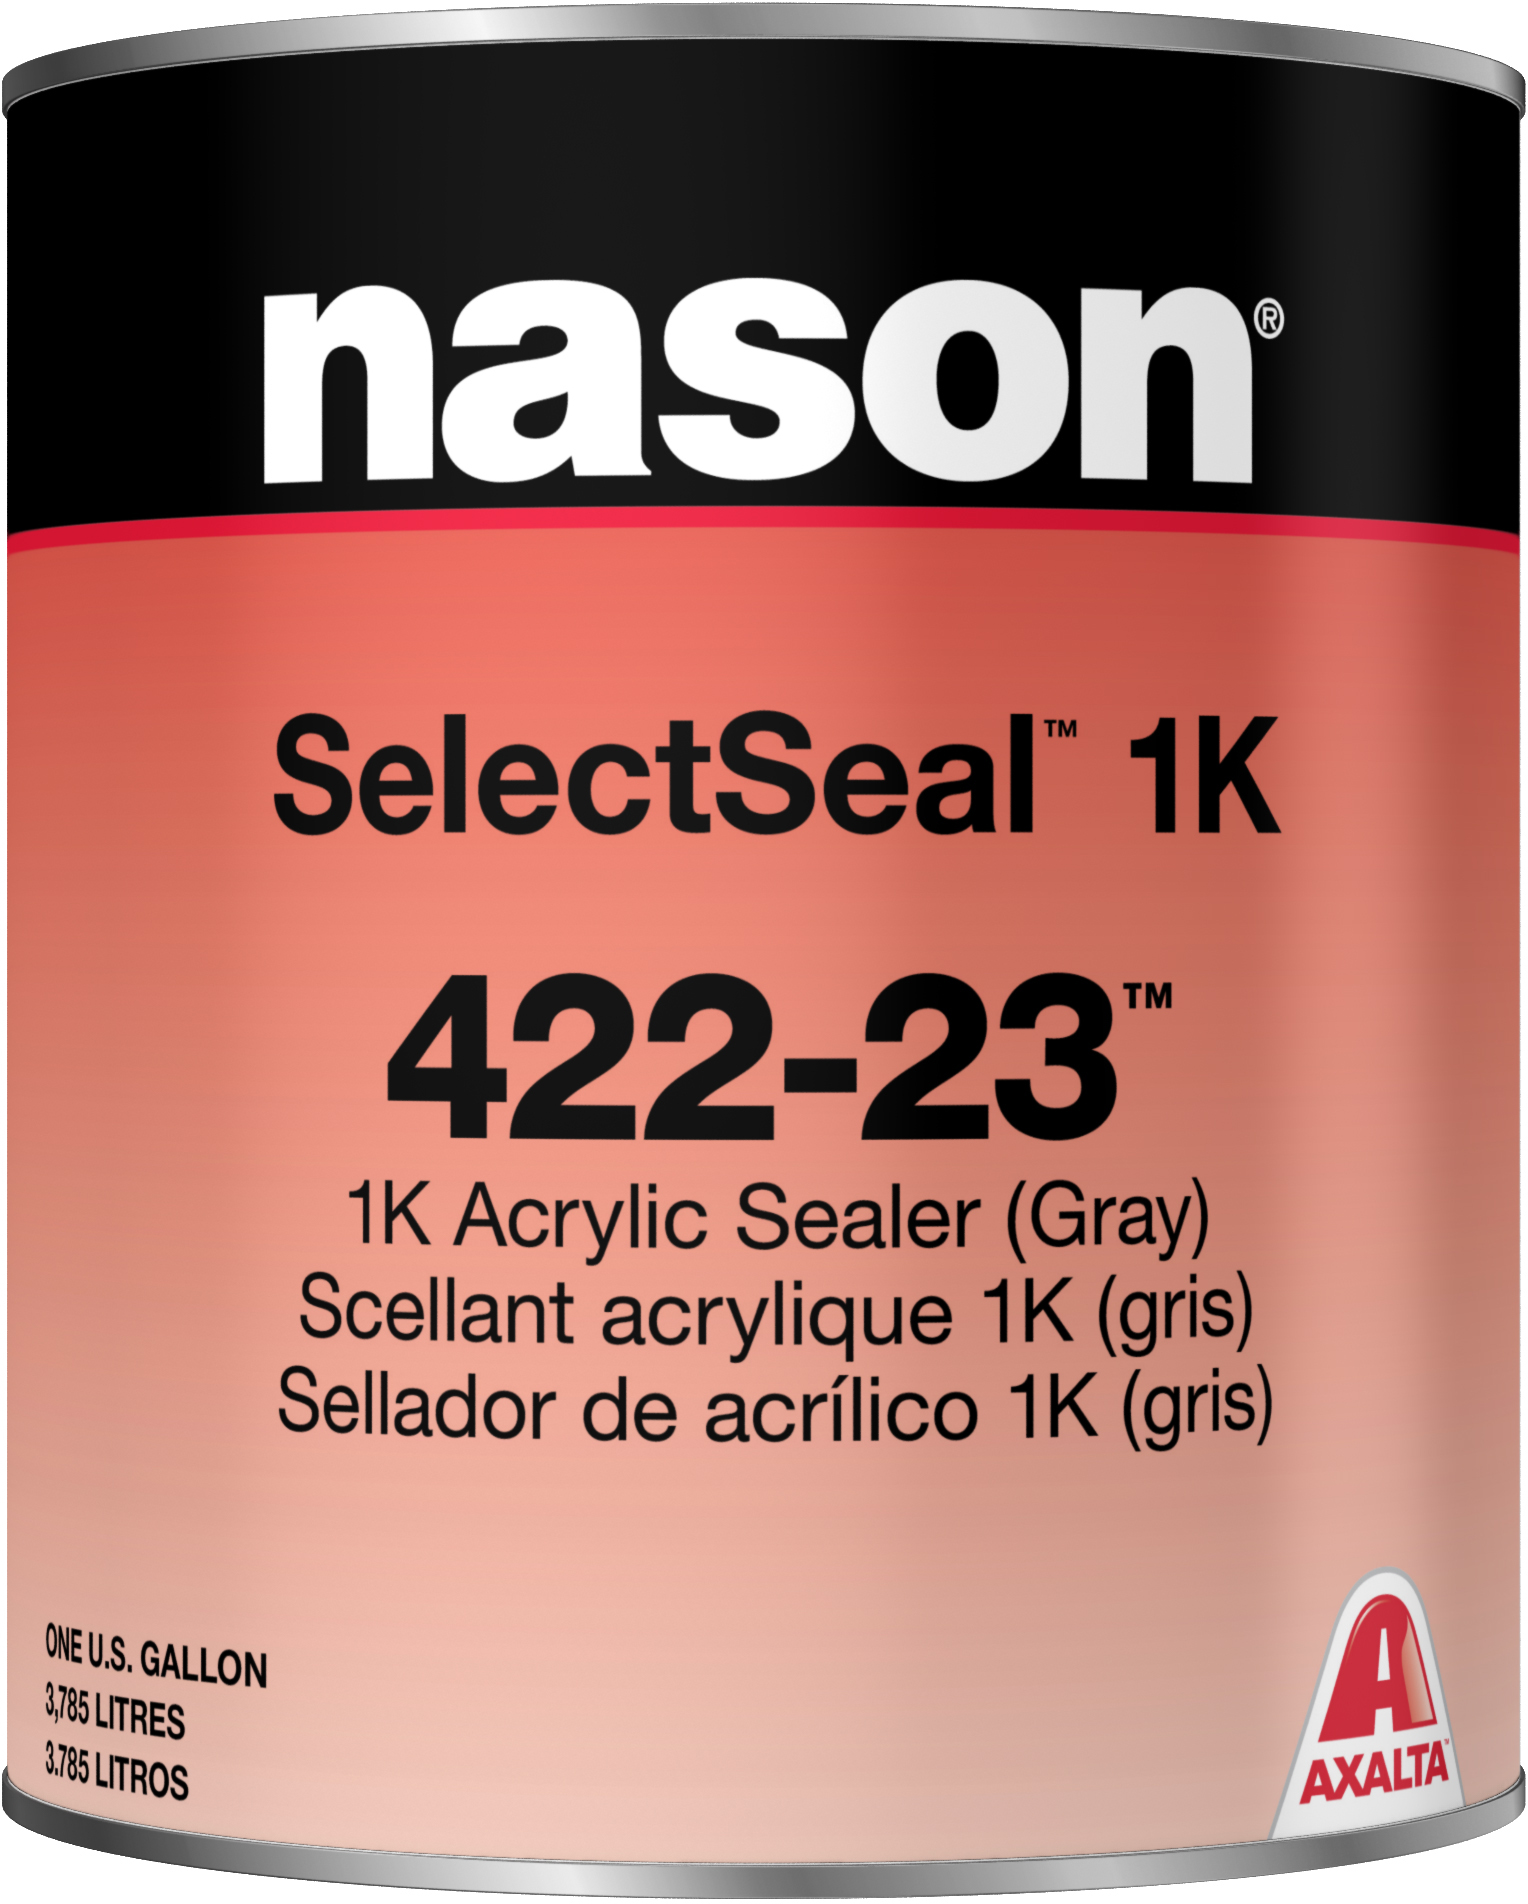 Clear acrylic sealer • Compare & find best price now »